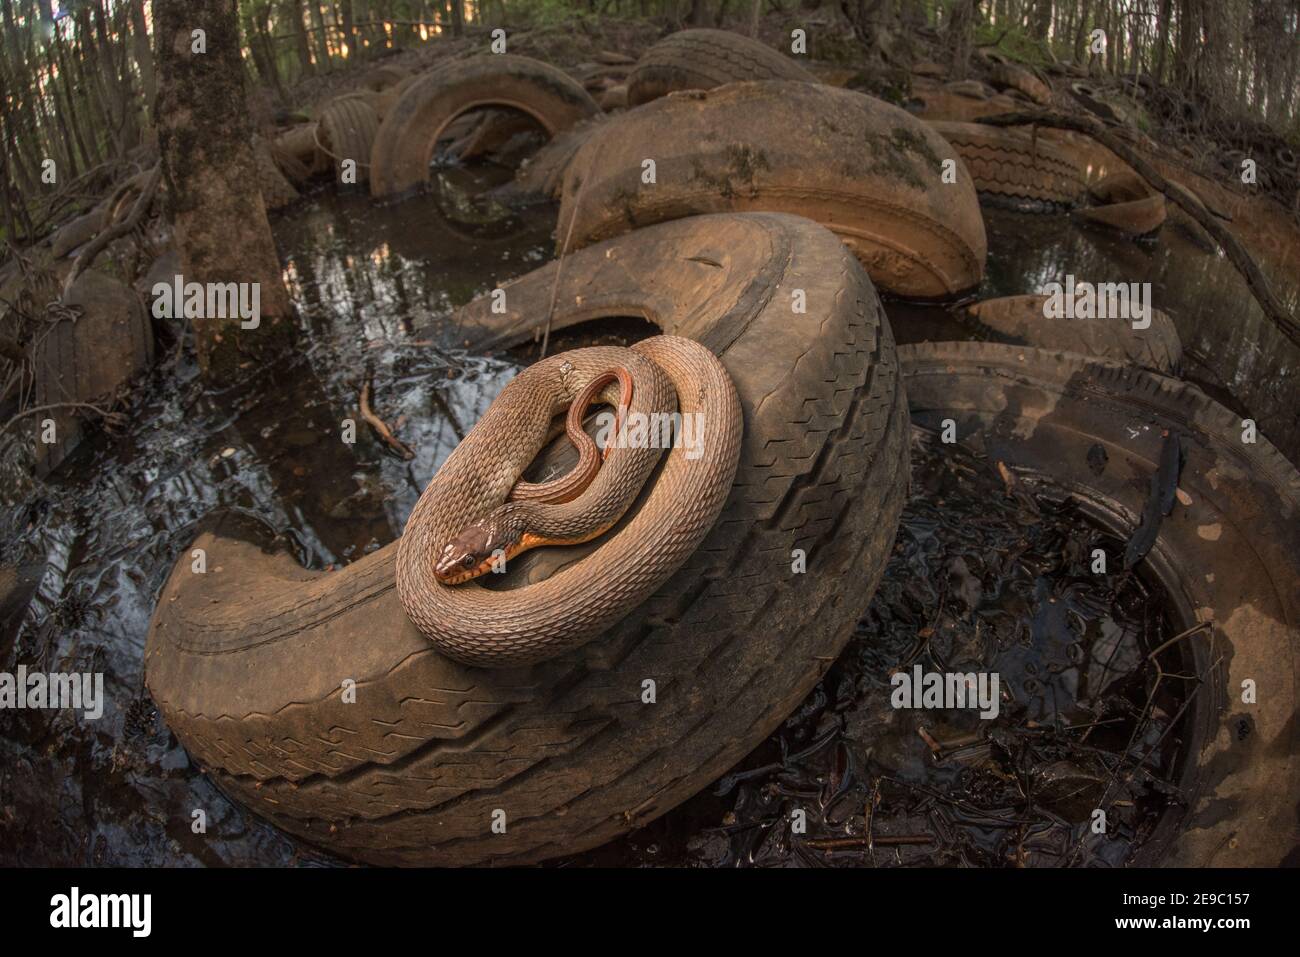 A water snake (Nerodia erythrogaster) coiled on discarded tires in a contaminated and polluted wetland in North Carolina, USA. Stock Photo